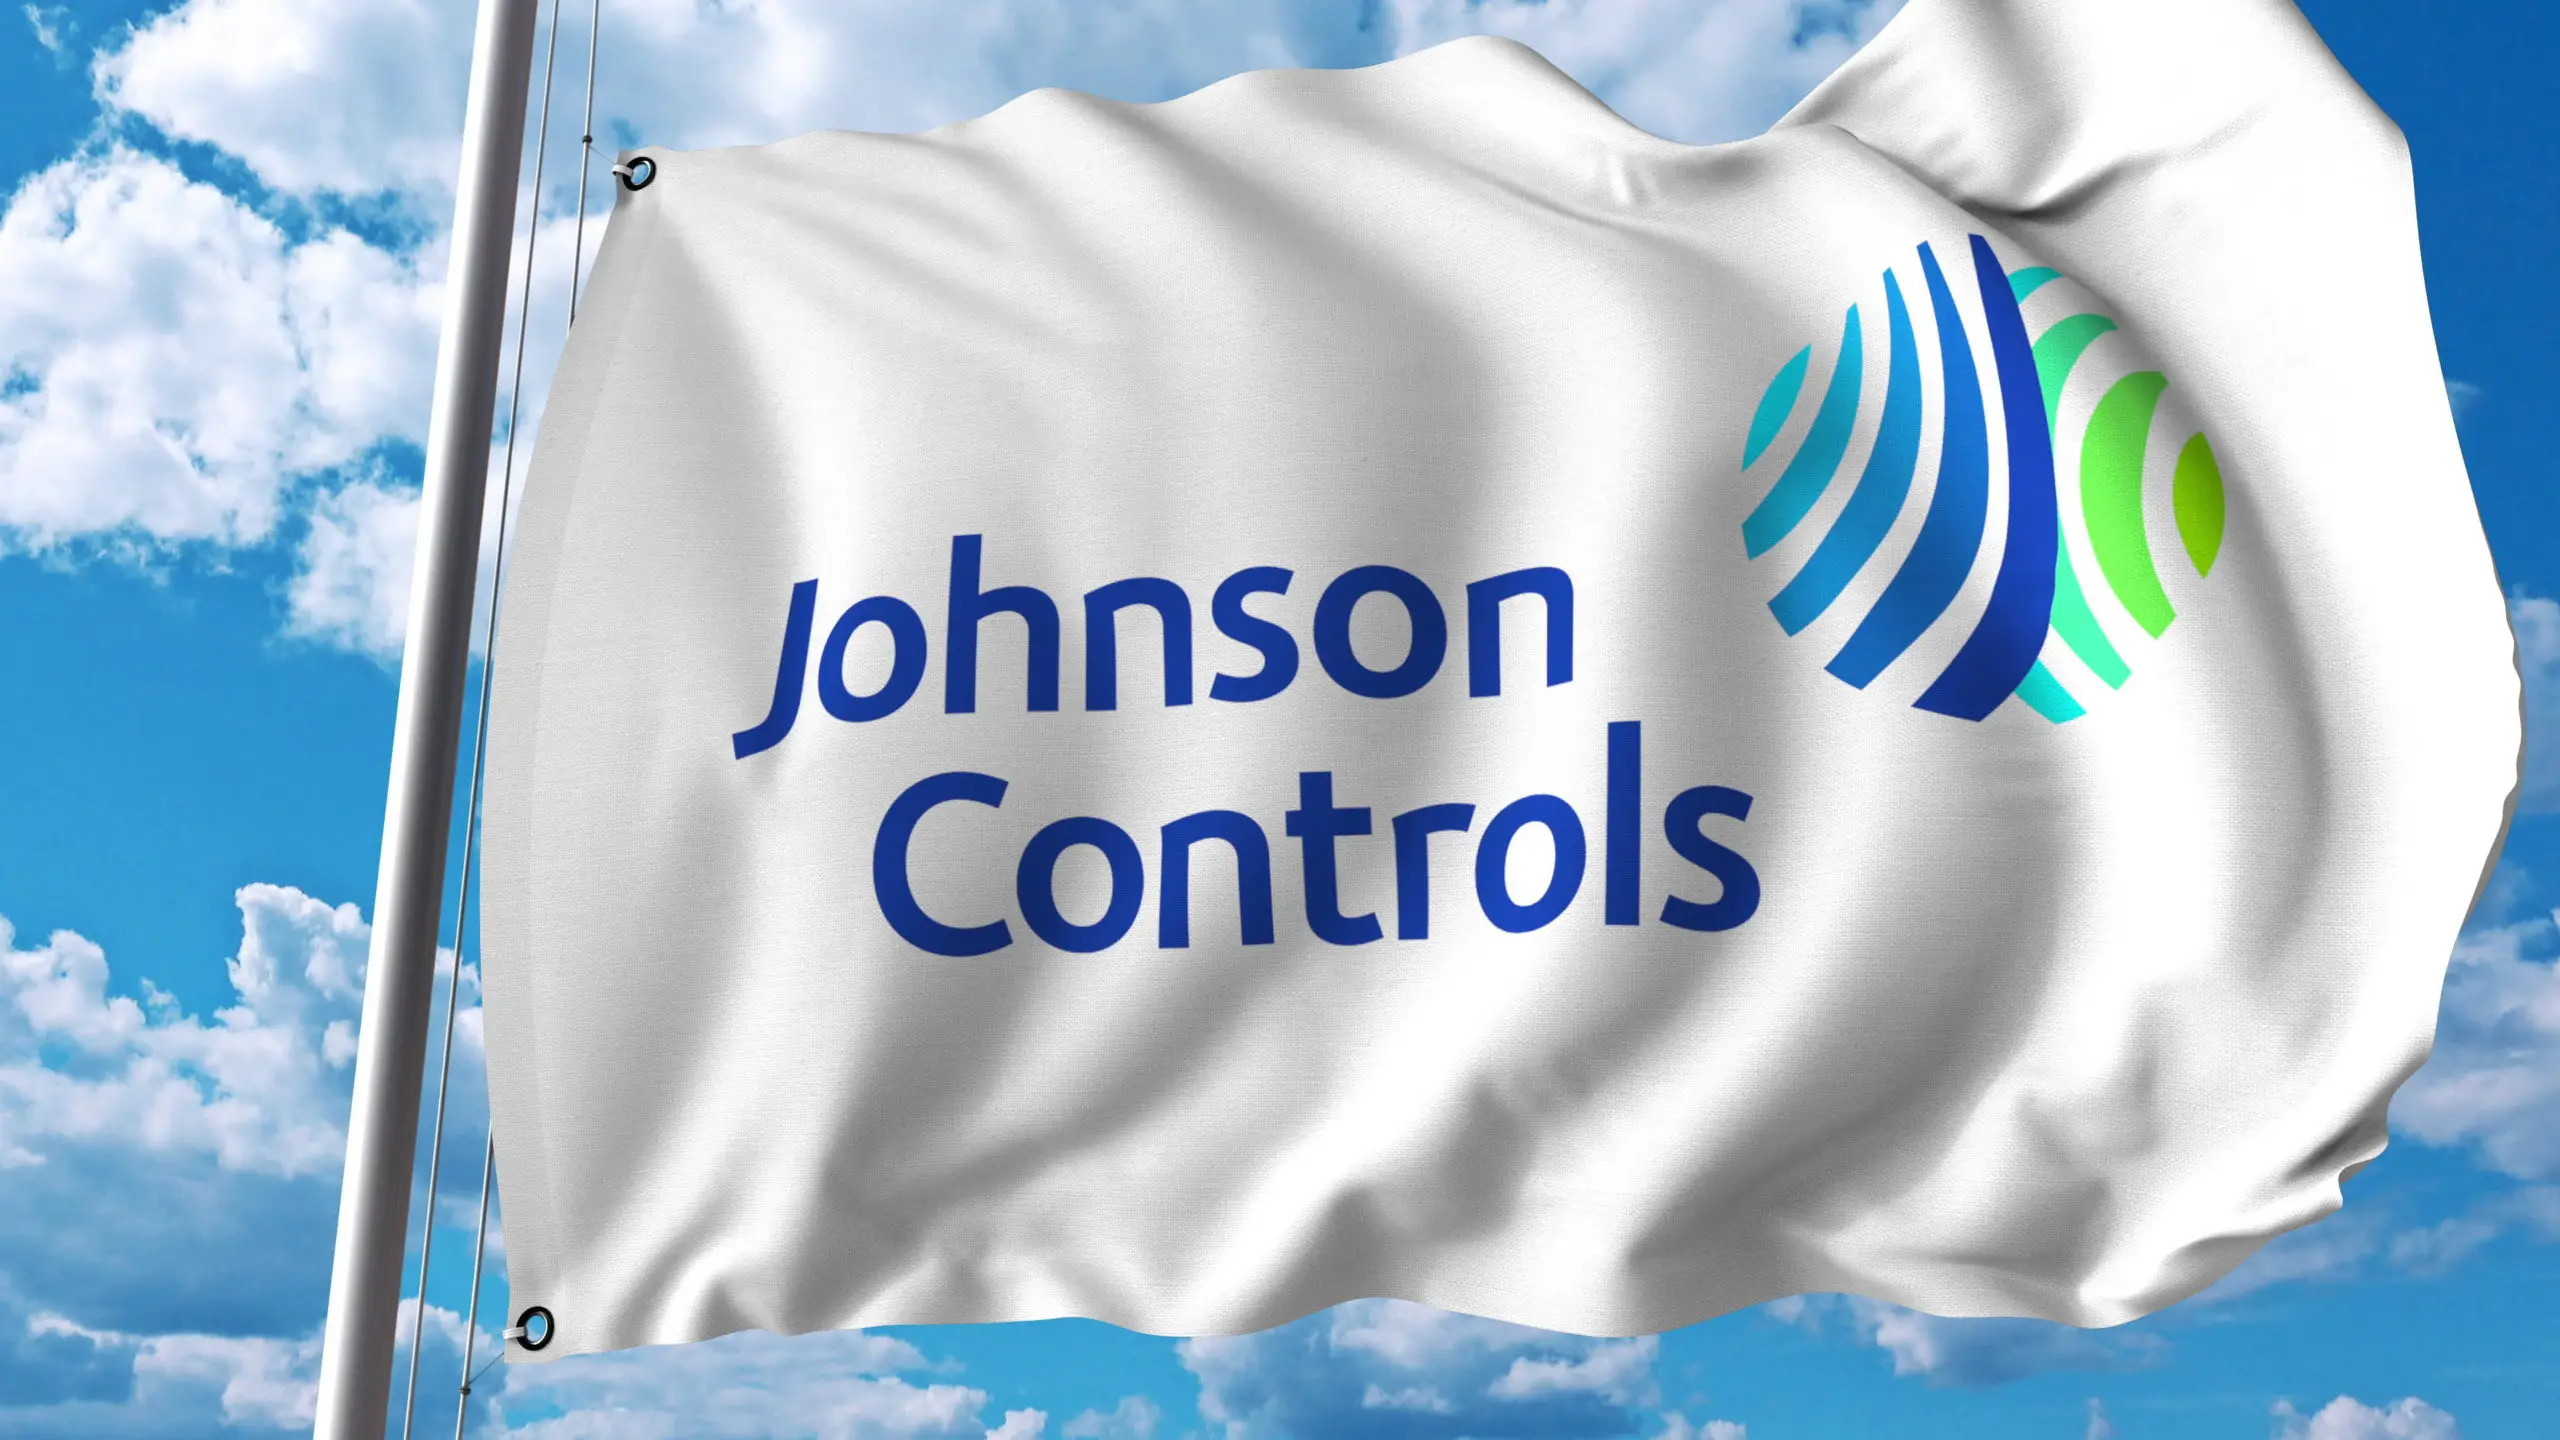 Johnson Controls appoints new VP, president of building solutions for